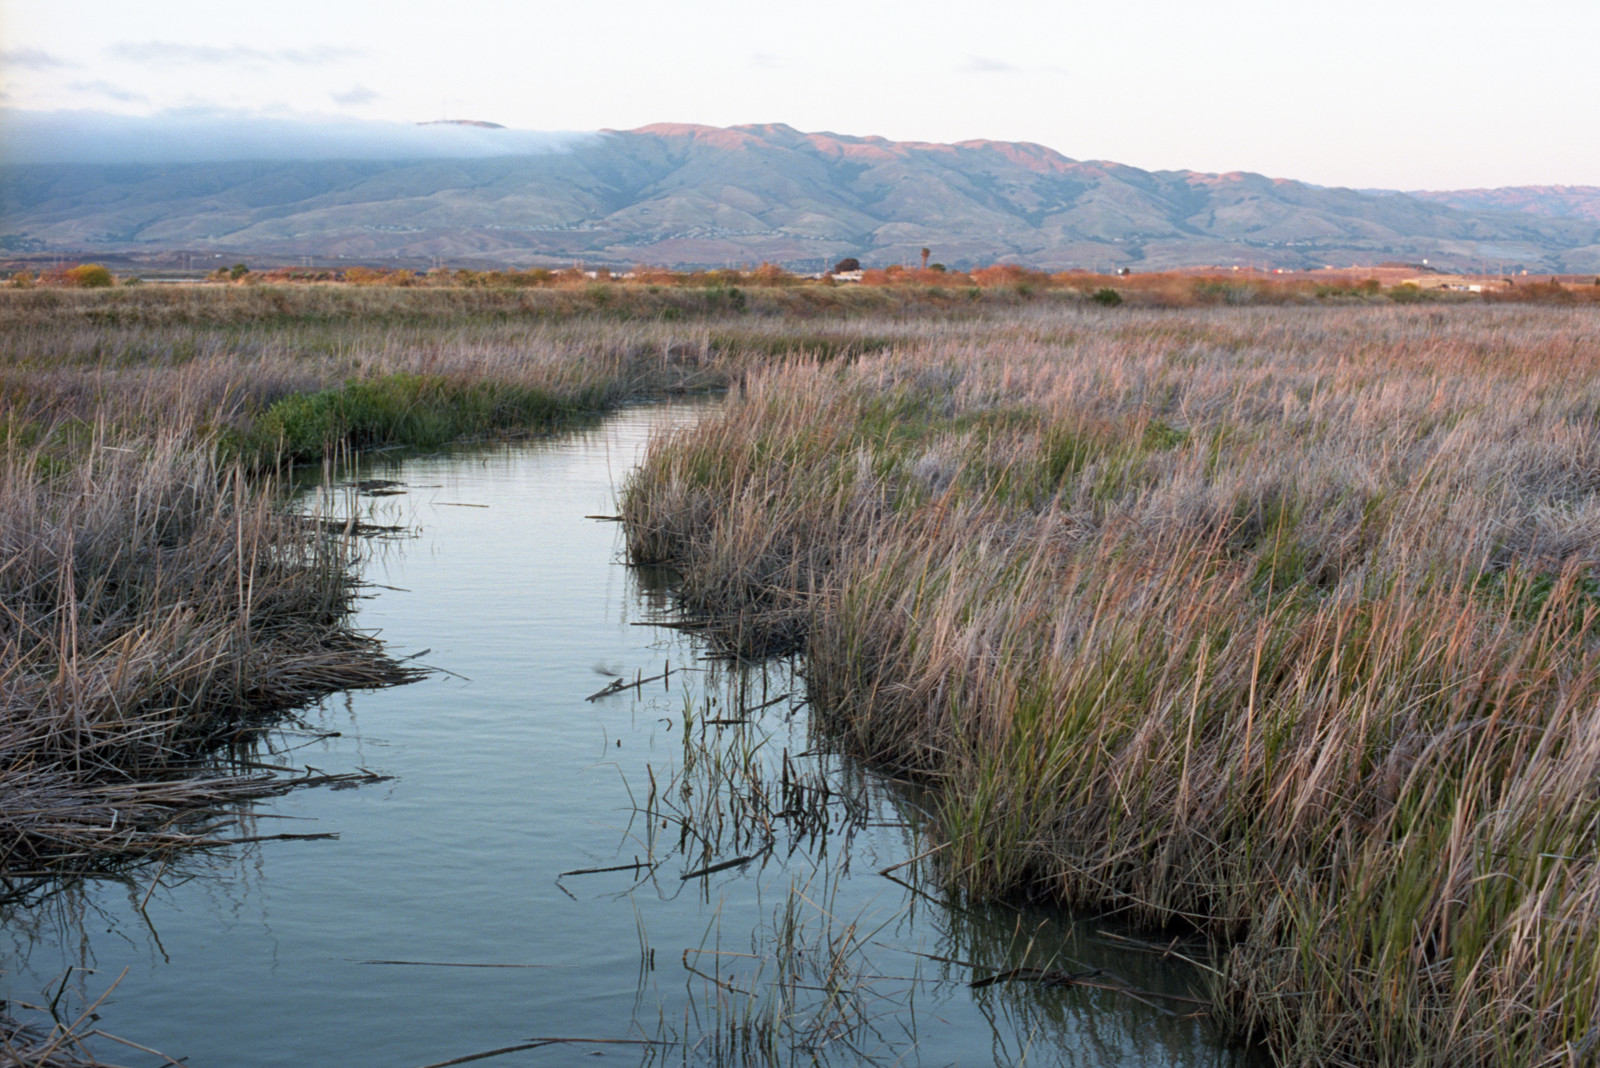 Creek shown coursing through the wetlands at Don Edwards Wildlife Refuge at Alviso, at the south end of San Francisco Bay. In the distance, fogbank moving in on the mountains of the southern East Bay.